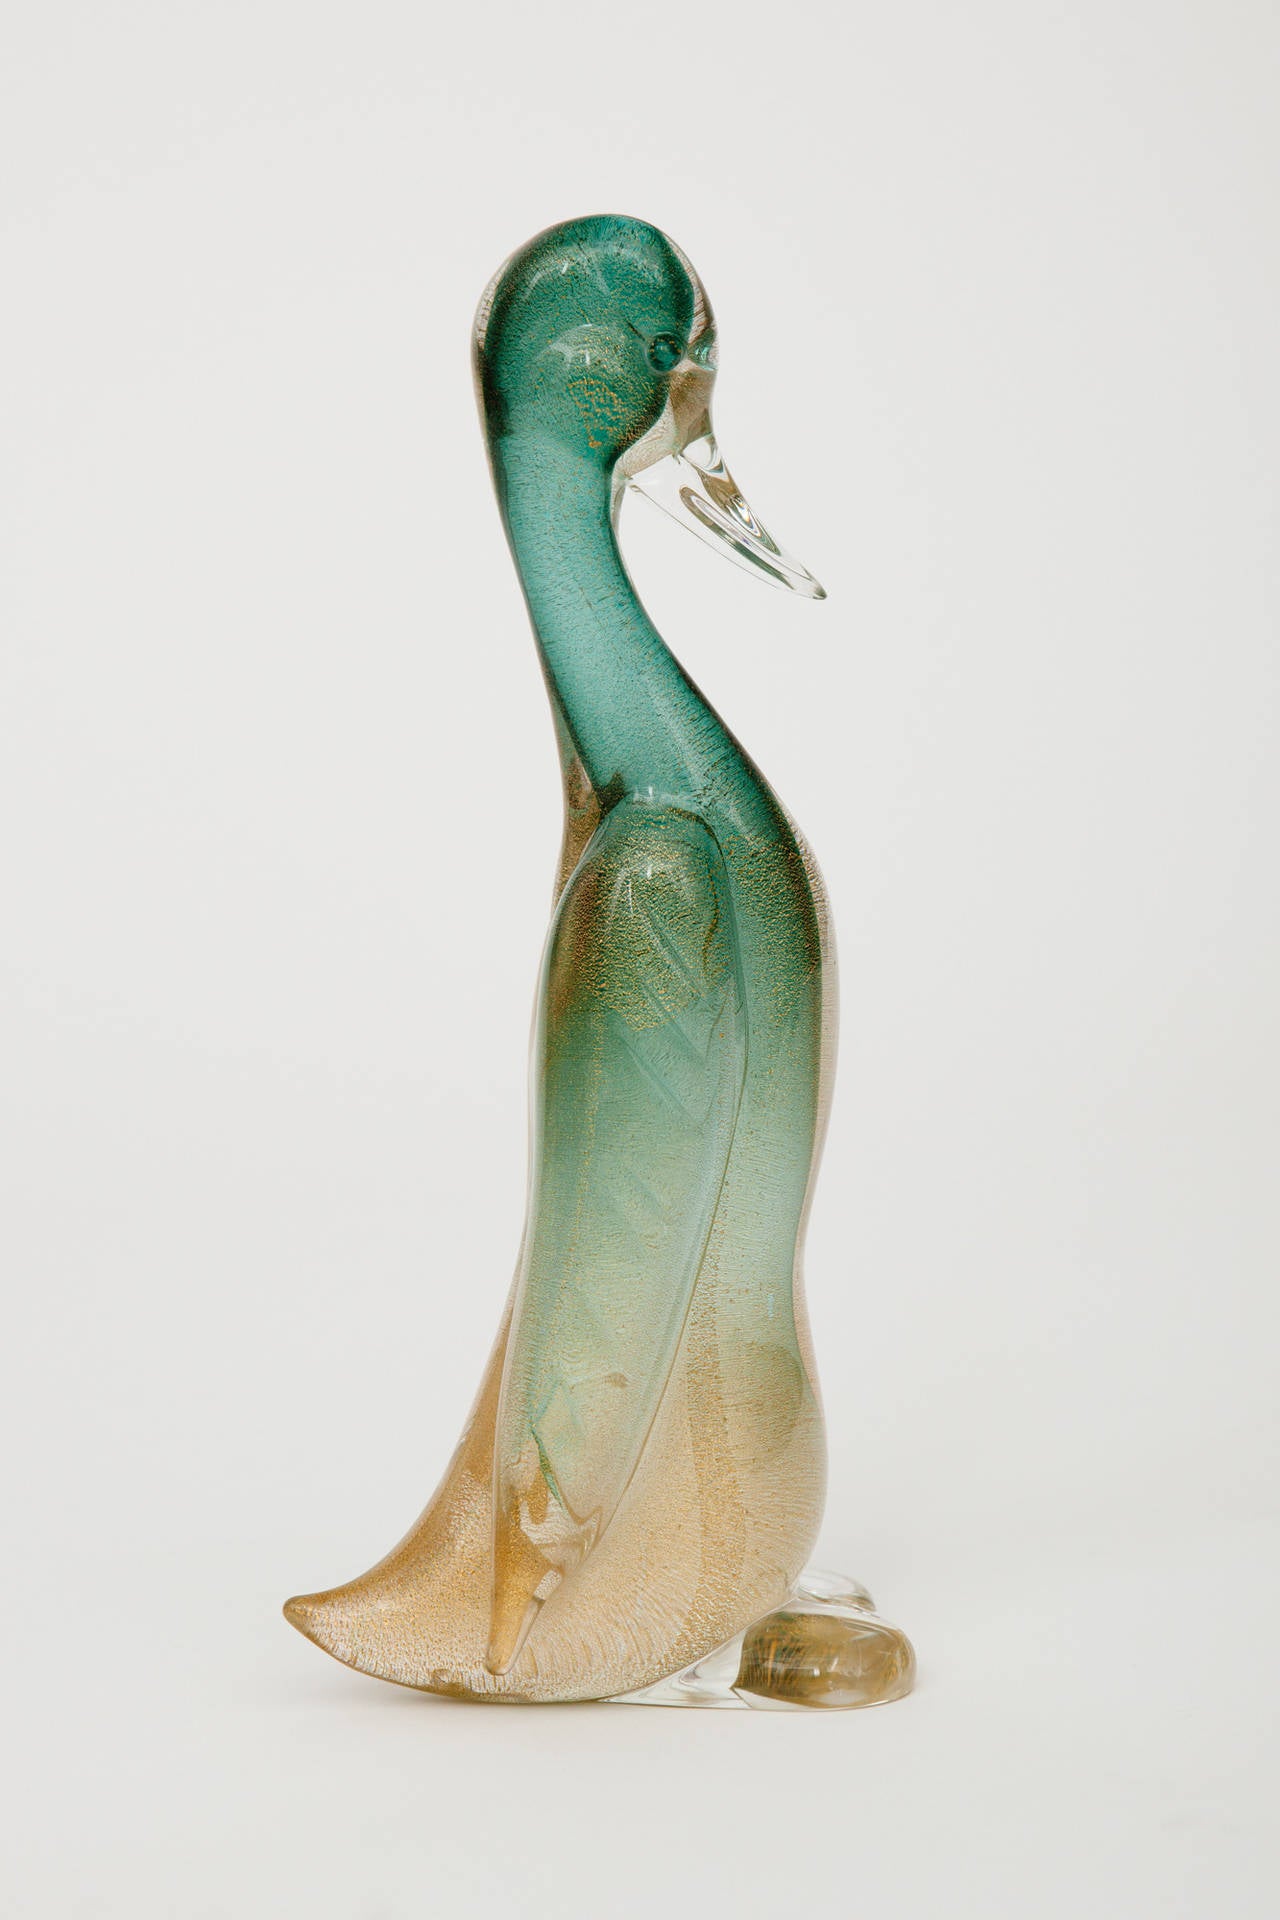 Decorative Murano glass duck.
Handblown and controlled gold leaf.